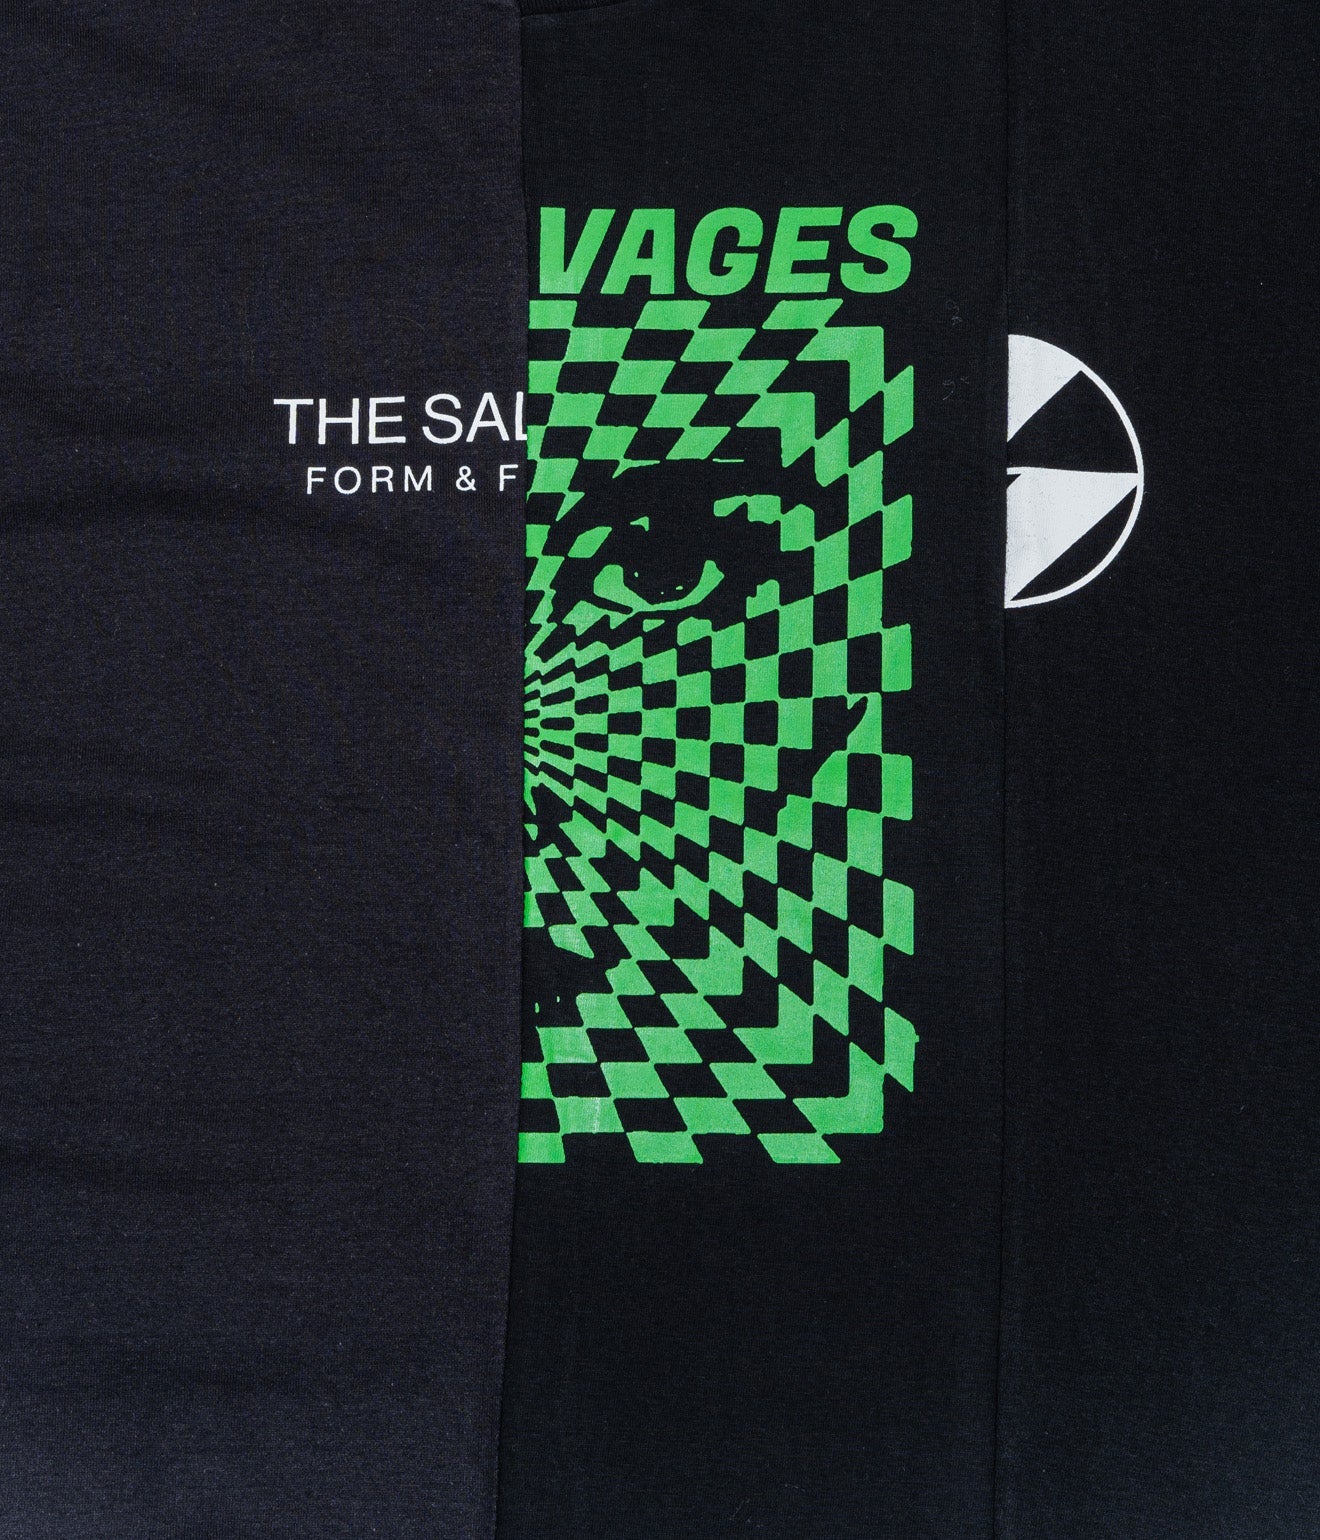 THE SALVAGES "SS23 RECONSTRUCTED T-SHIRT" Black - WEAREALLANIMALS